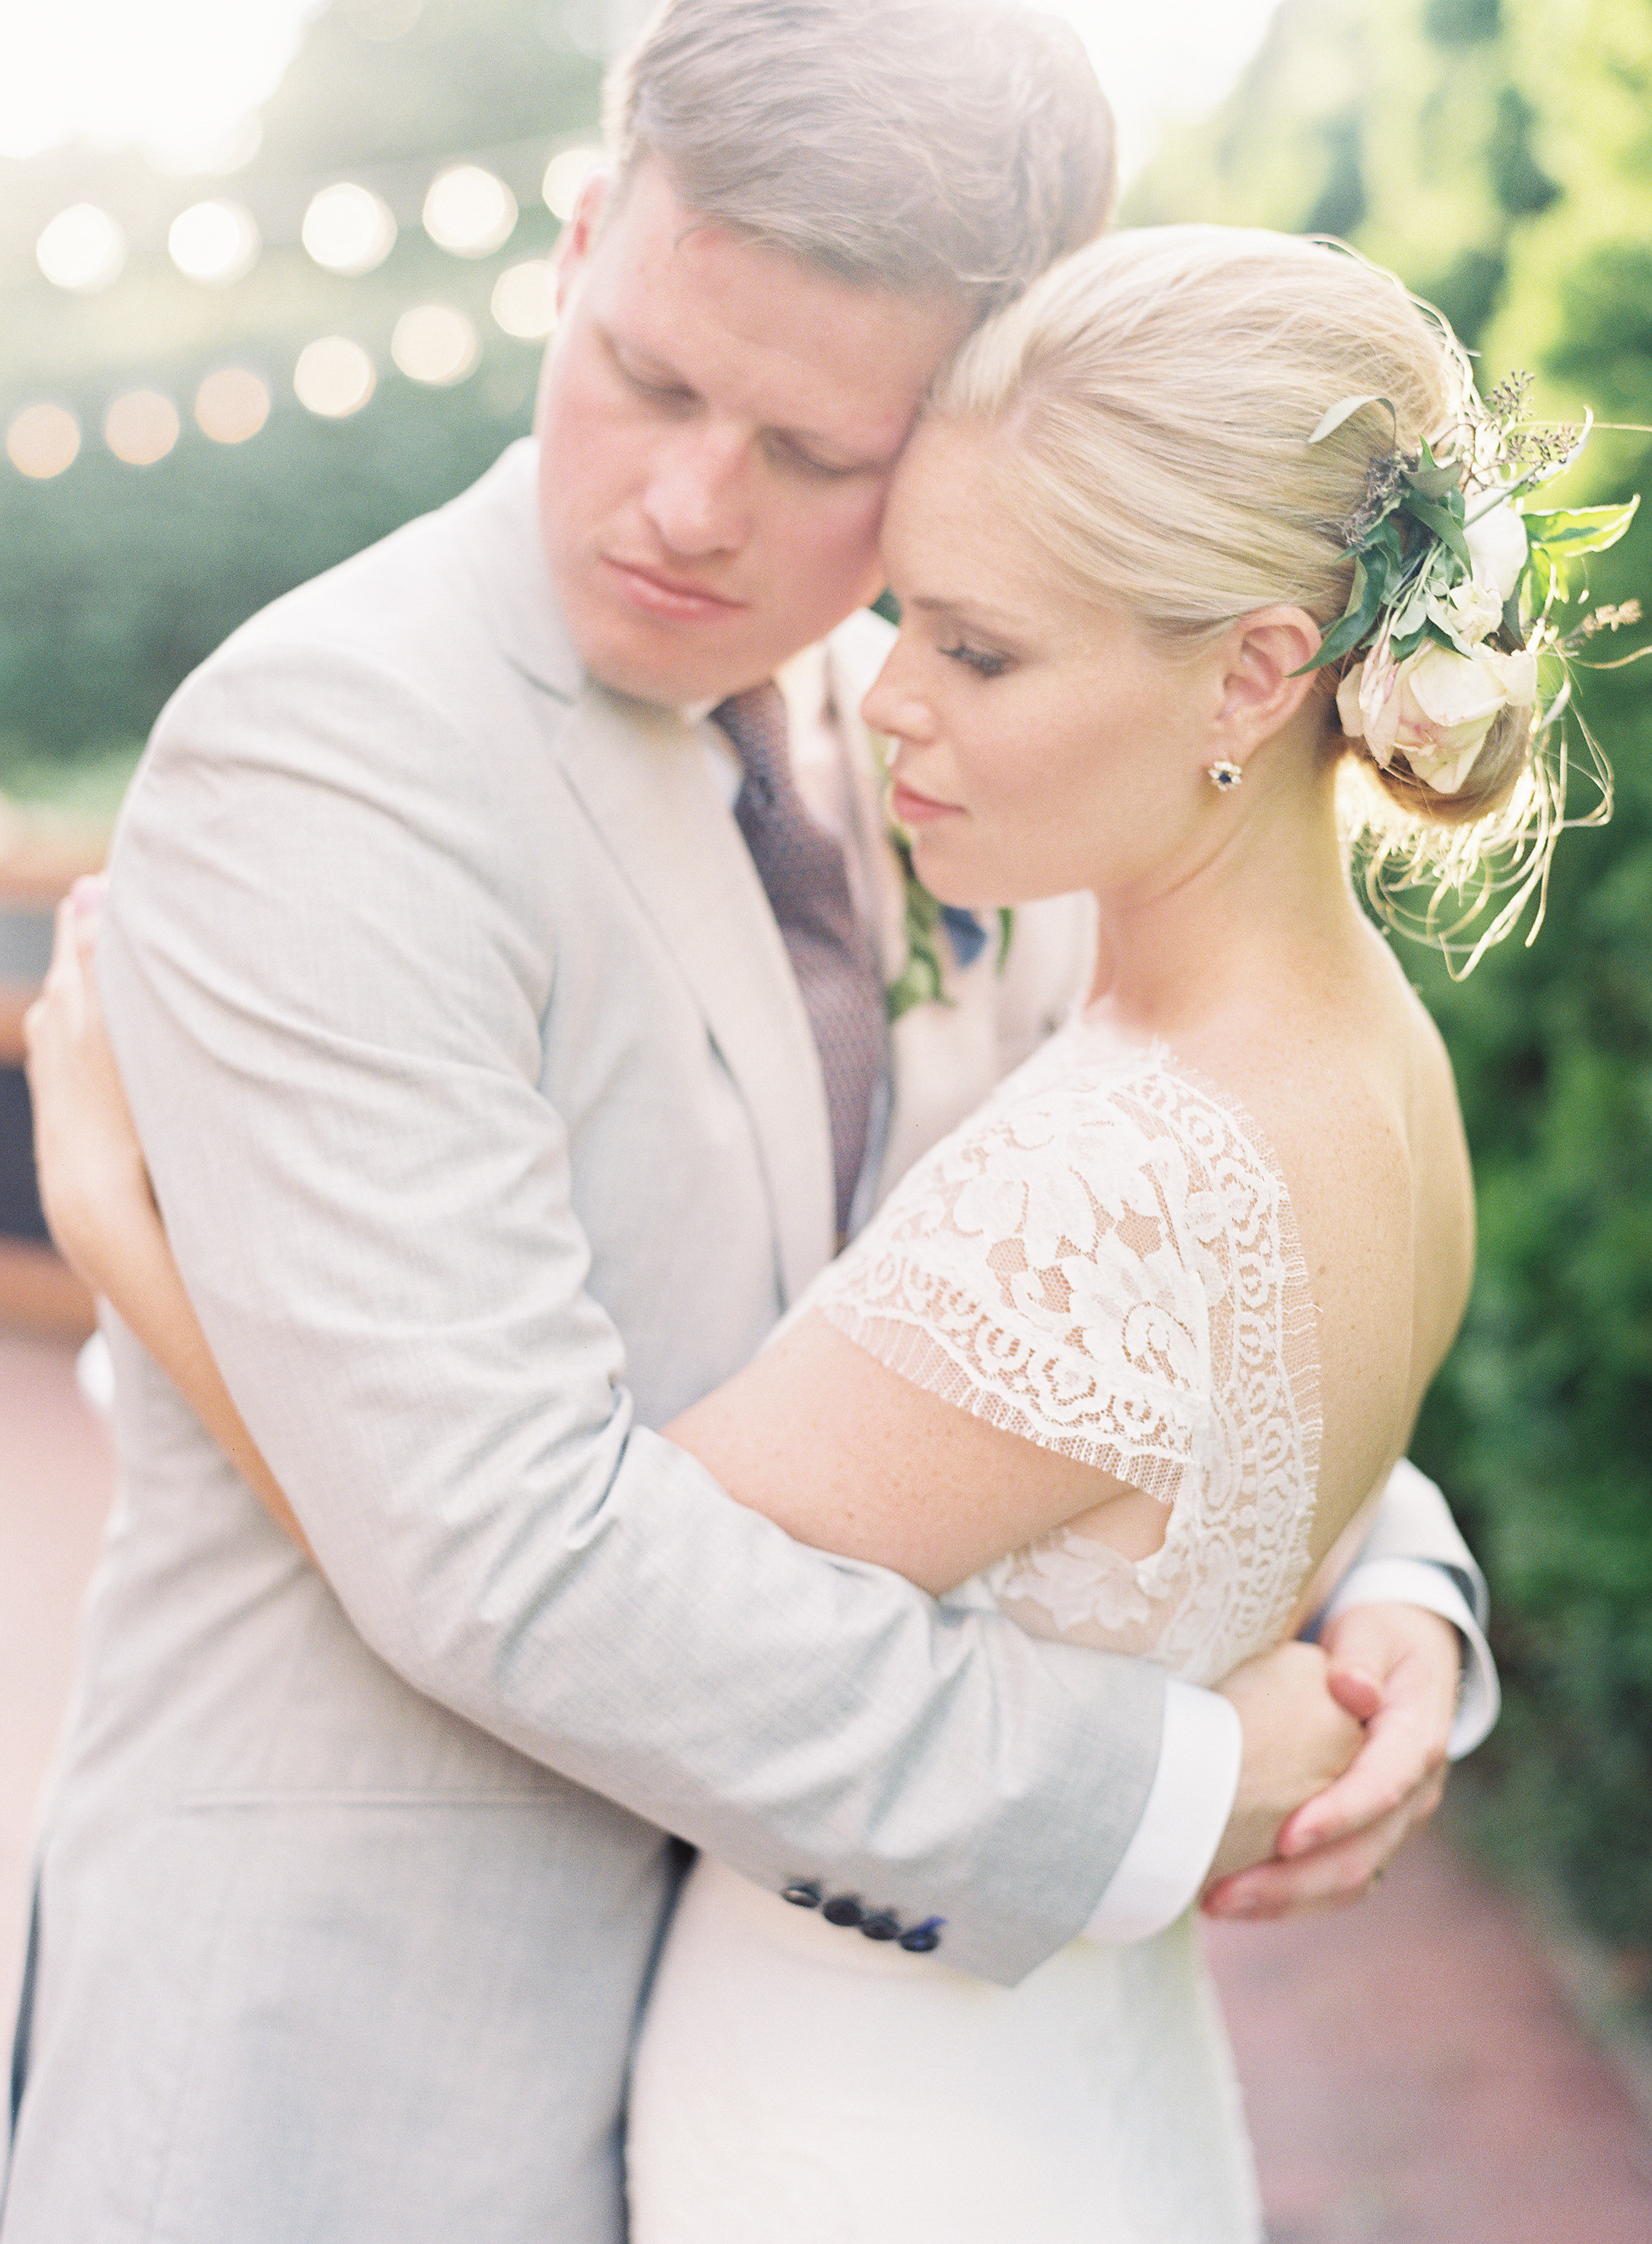 St Joseph Wedding| The Heritage Center | The Day's Design | Clary Pfeiffer Photography